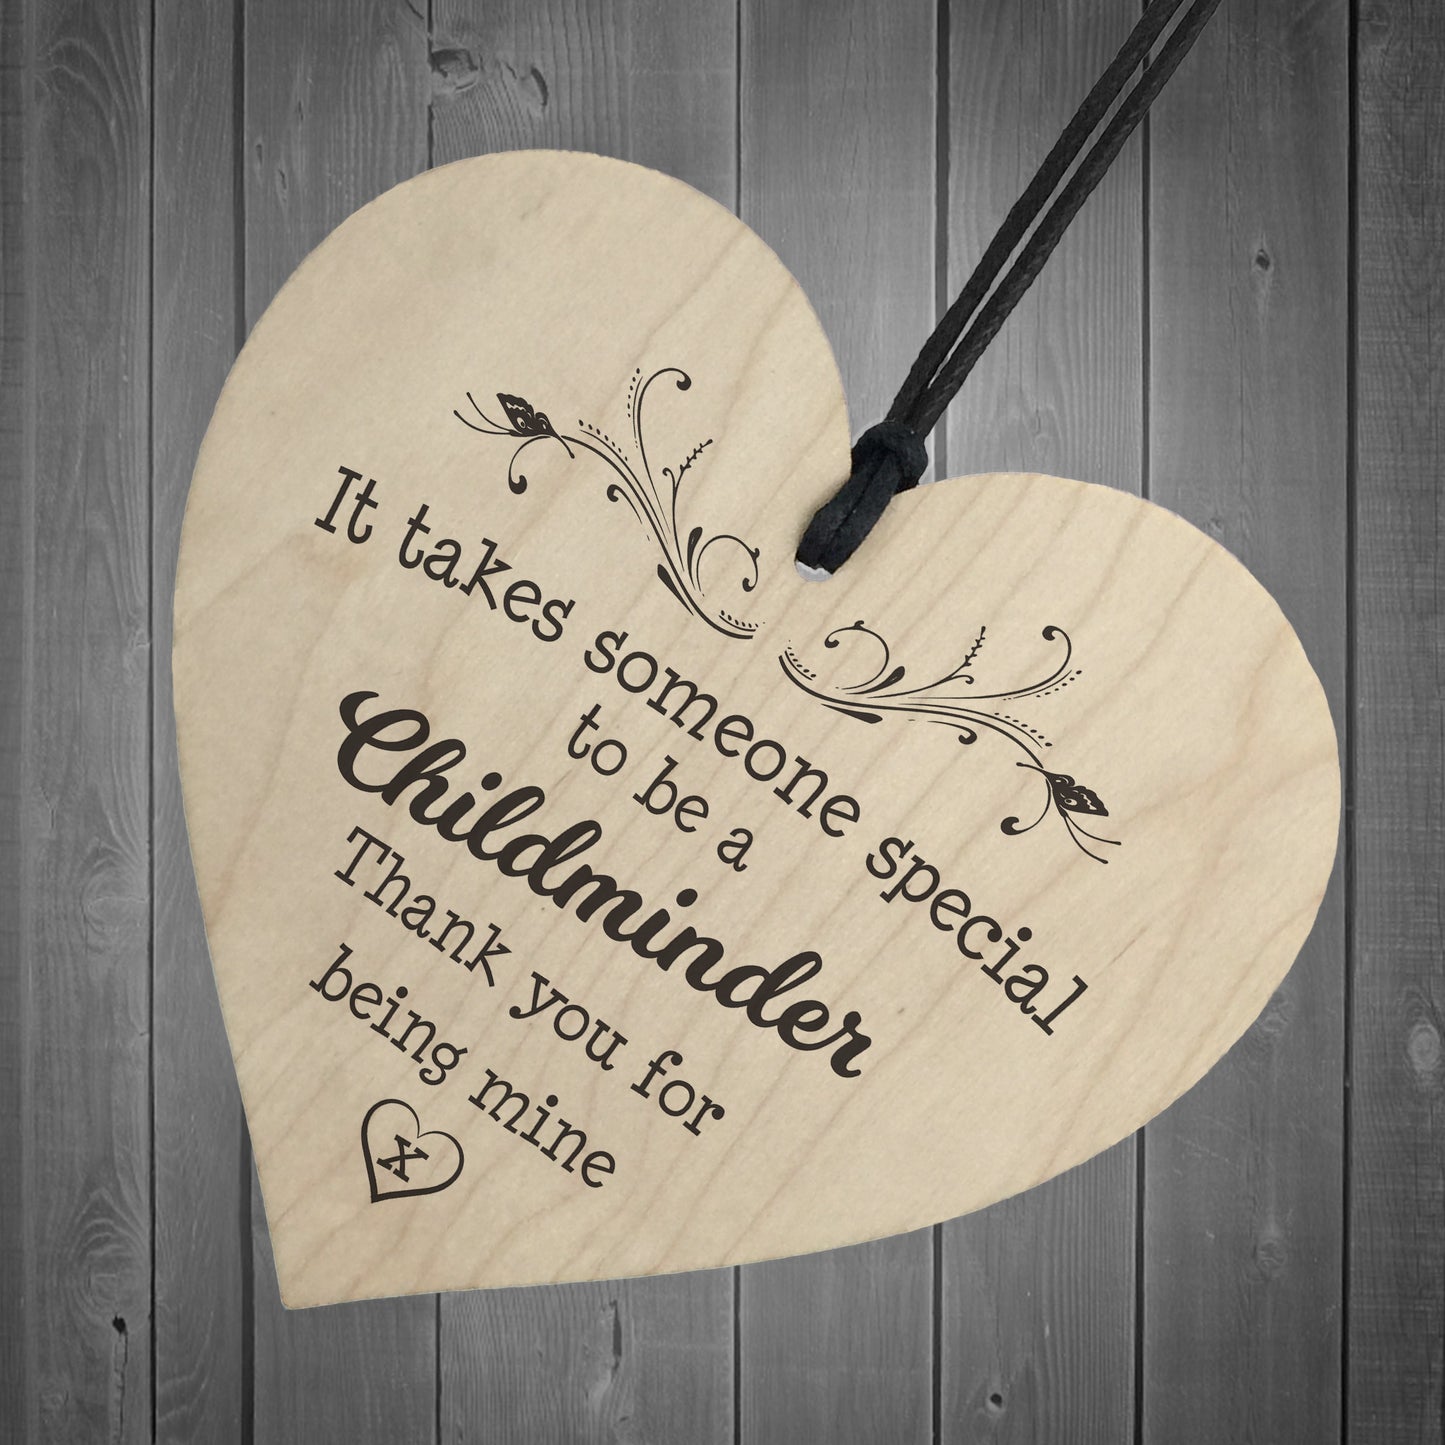 Thank You Special Childminder Wooden Hanging Heart Plaque